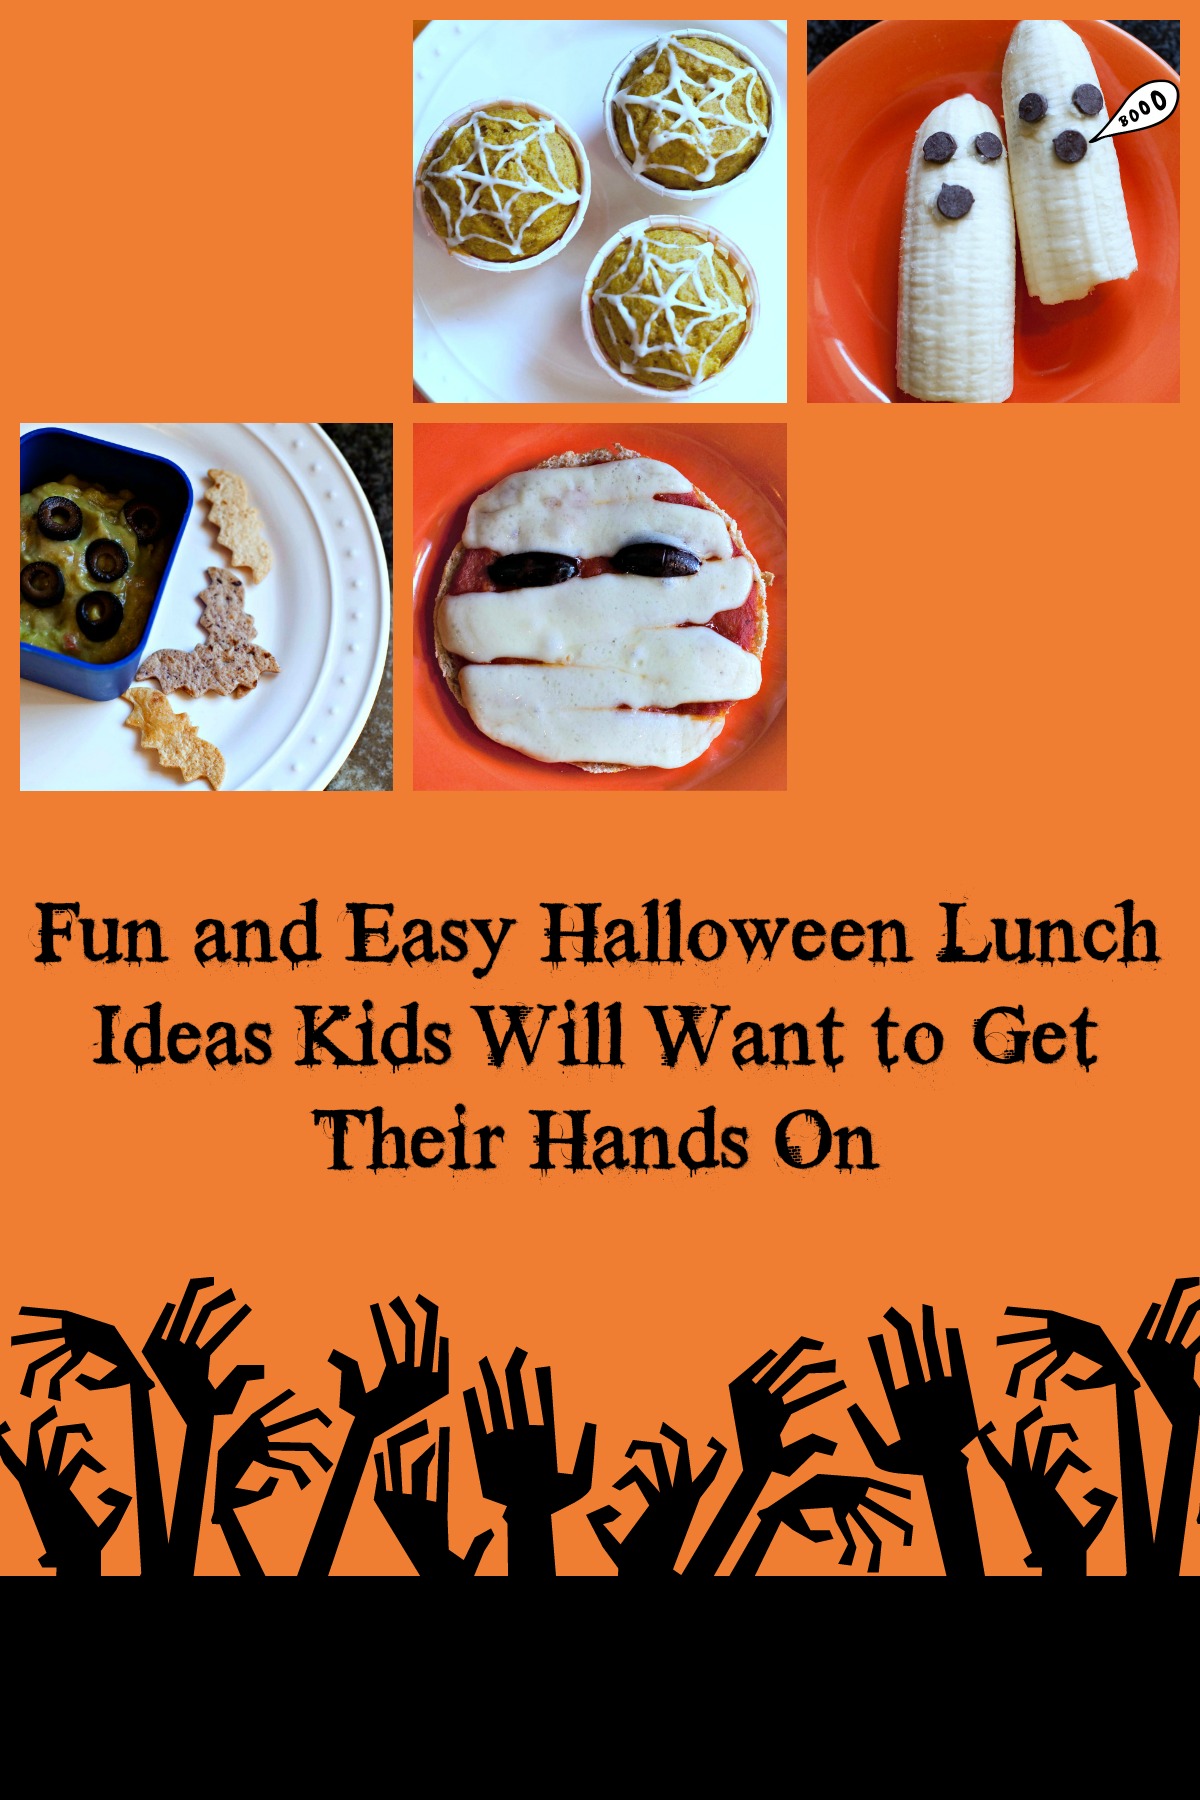 Fun and easy Halloween lunch ideas kids will want to get their hands on